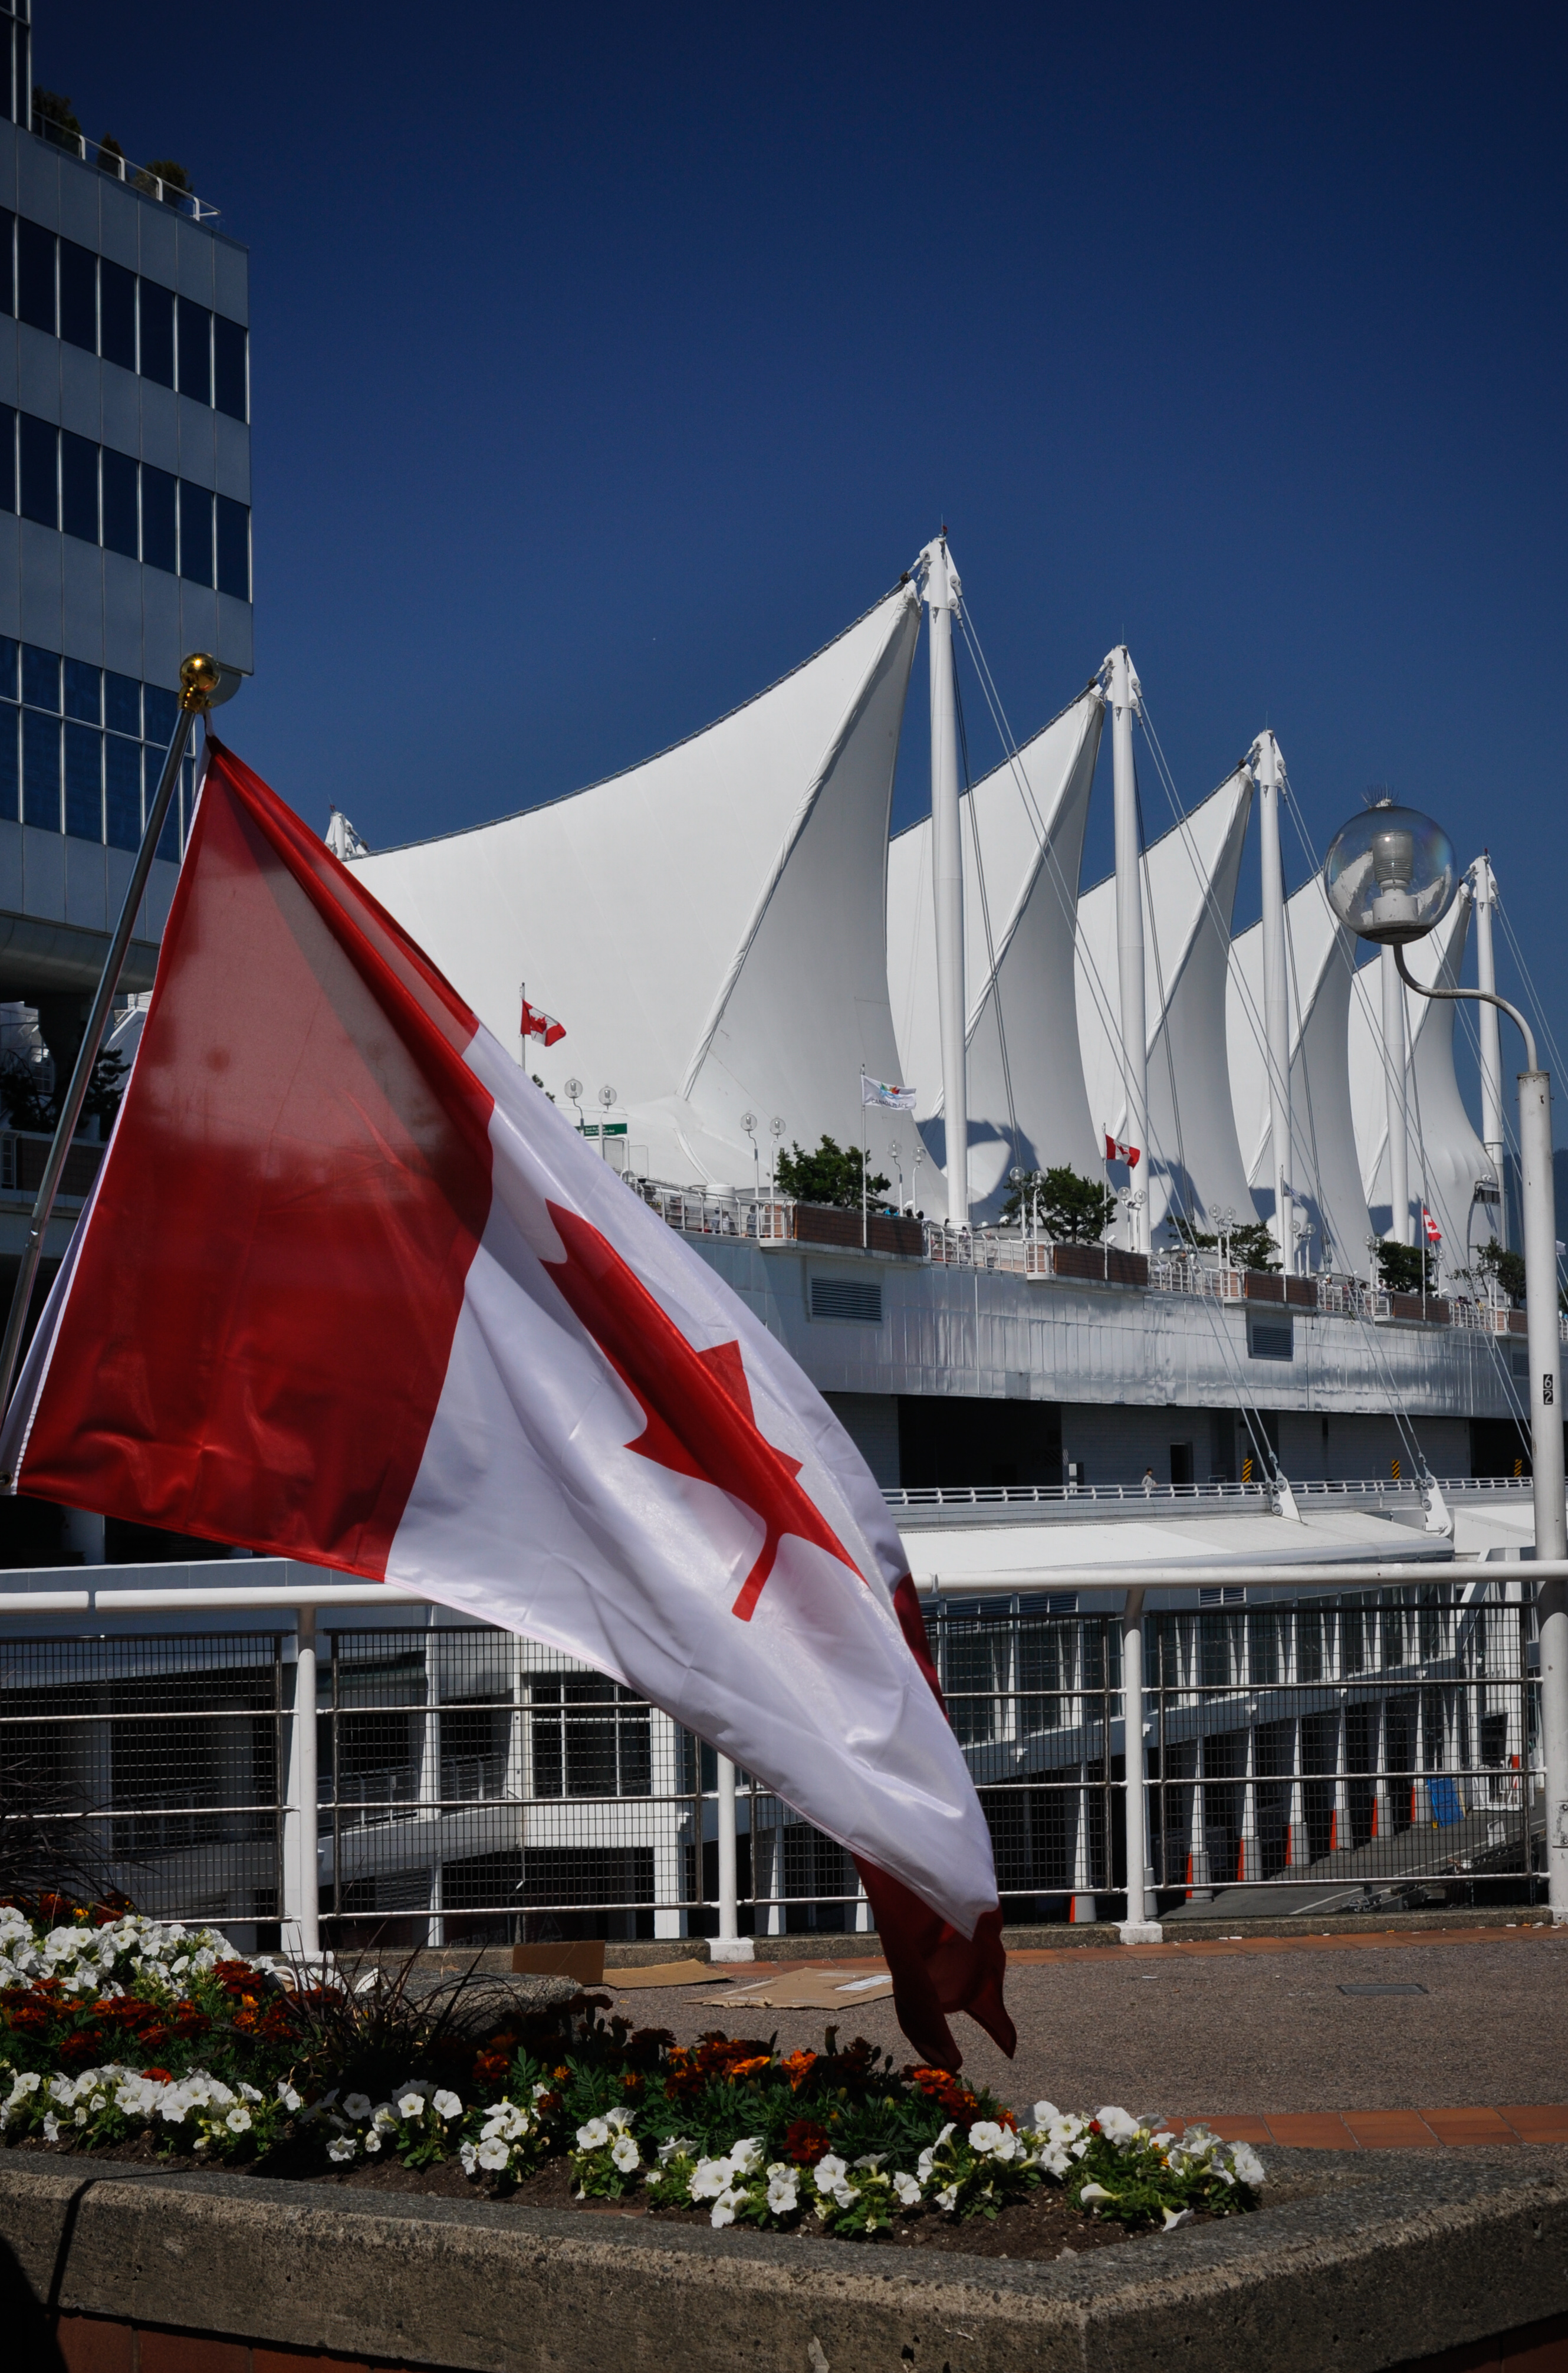 Ron Mouser: Canada Place - Vancouver, Canada